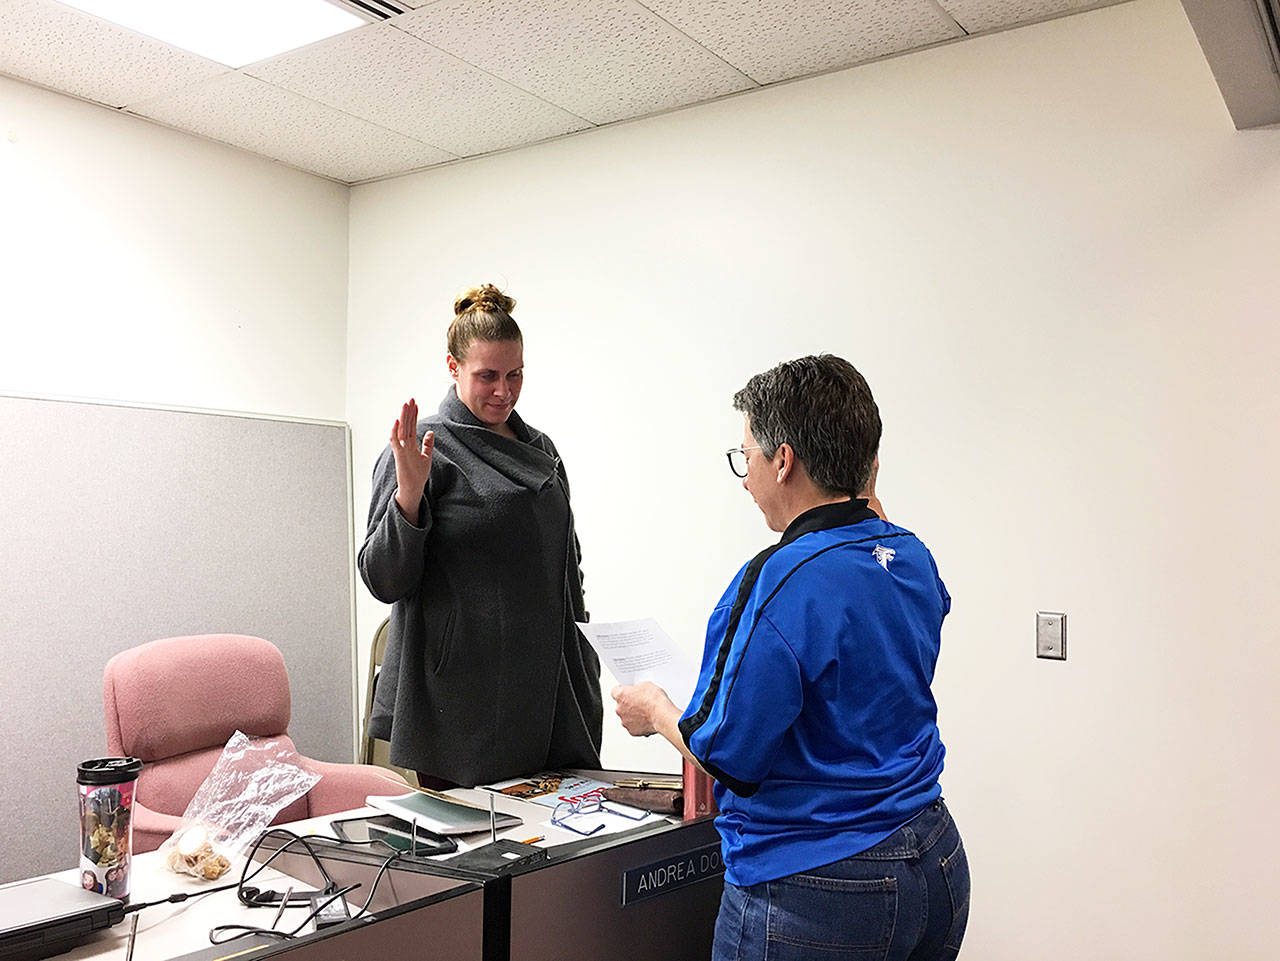 Contributed photo — Freeland resident Andrea Downs takes her oath of office from South Whidbey School District Superintendent Jo Moccia at the South Whidbey School Board’s monthly meeting on Dec. 13 at South Whidbey Elementary School. Downs was elected to position 2 on the board.